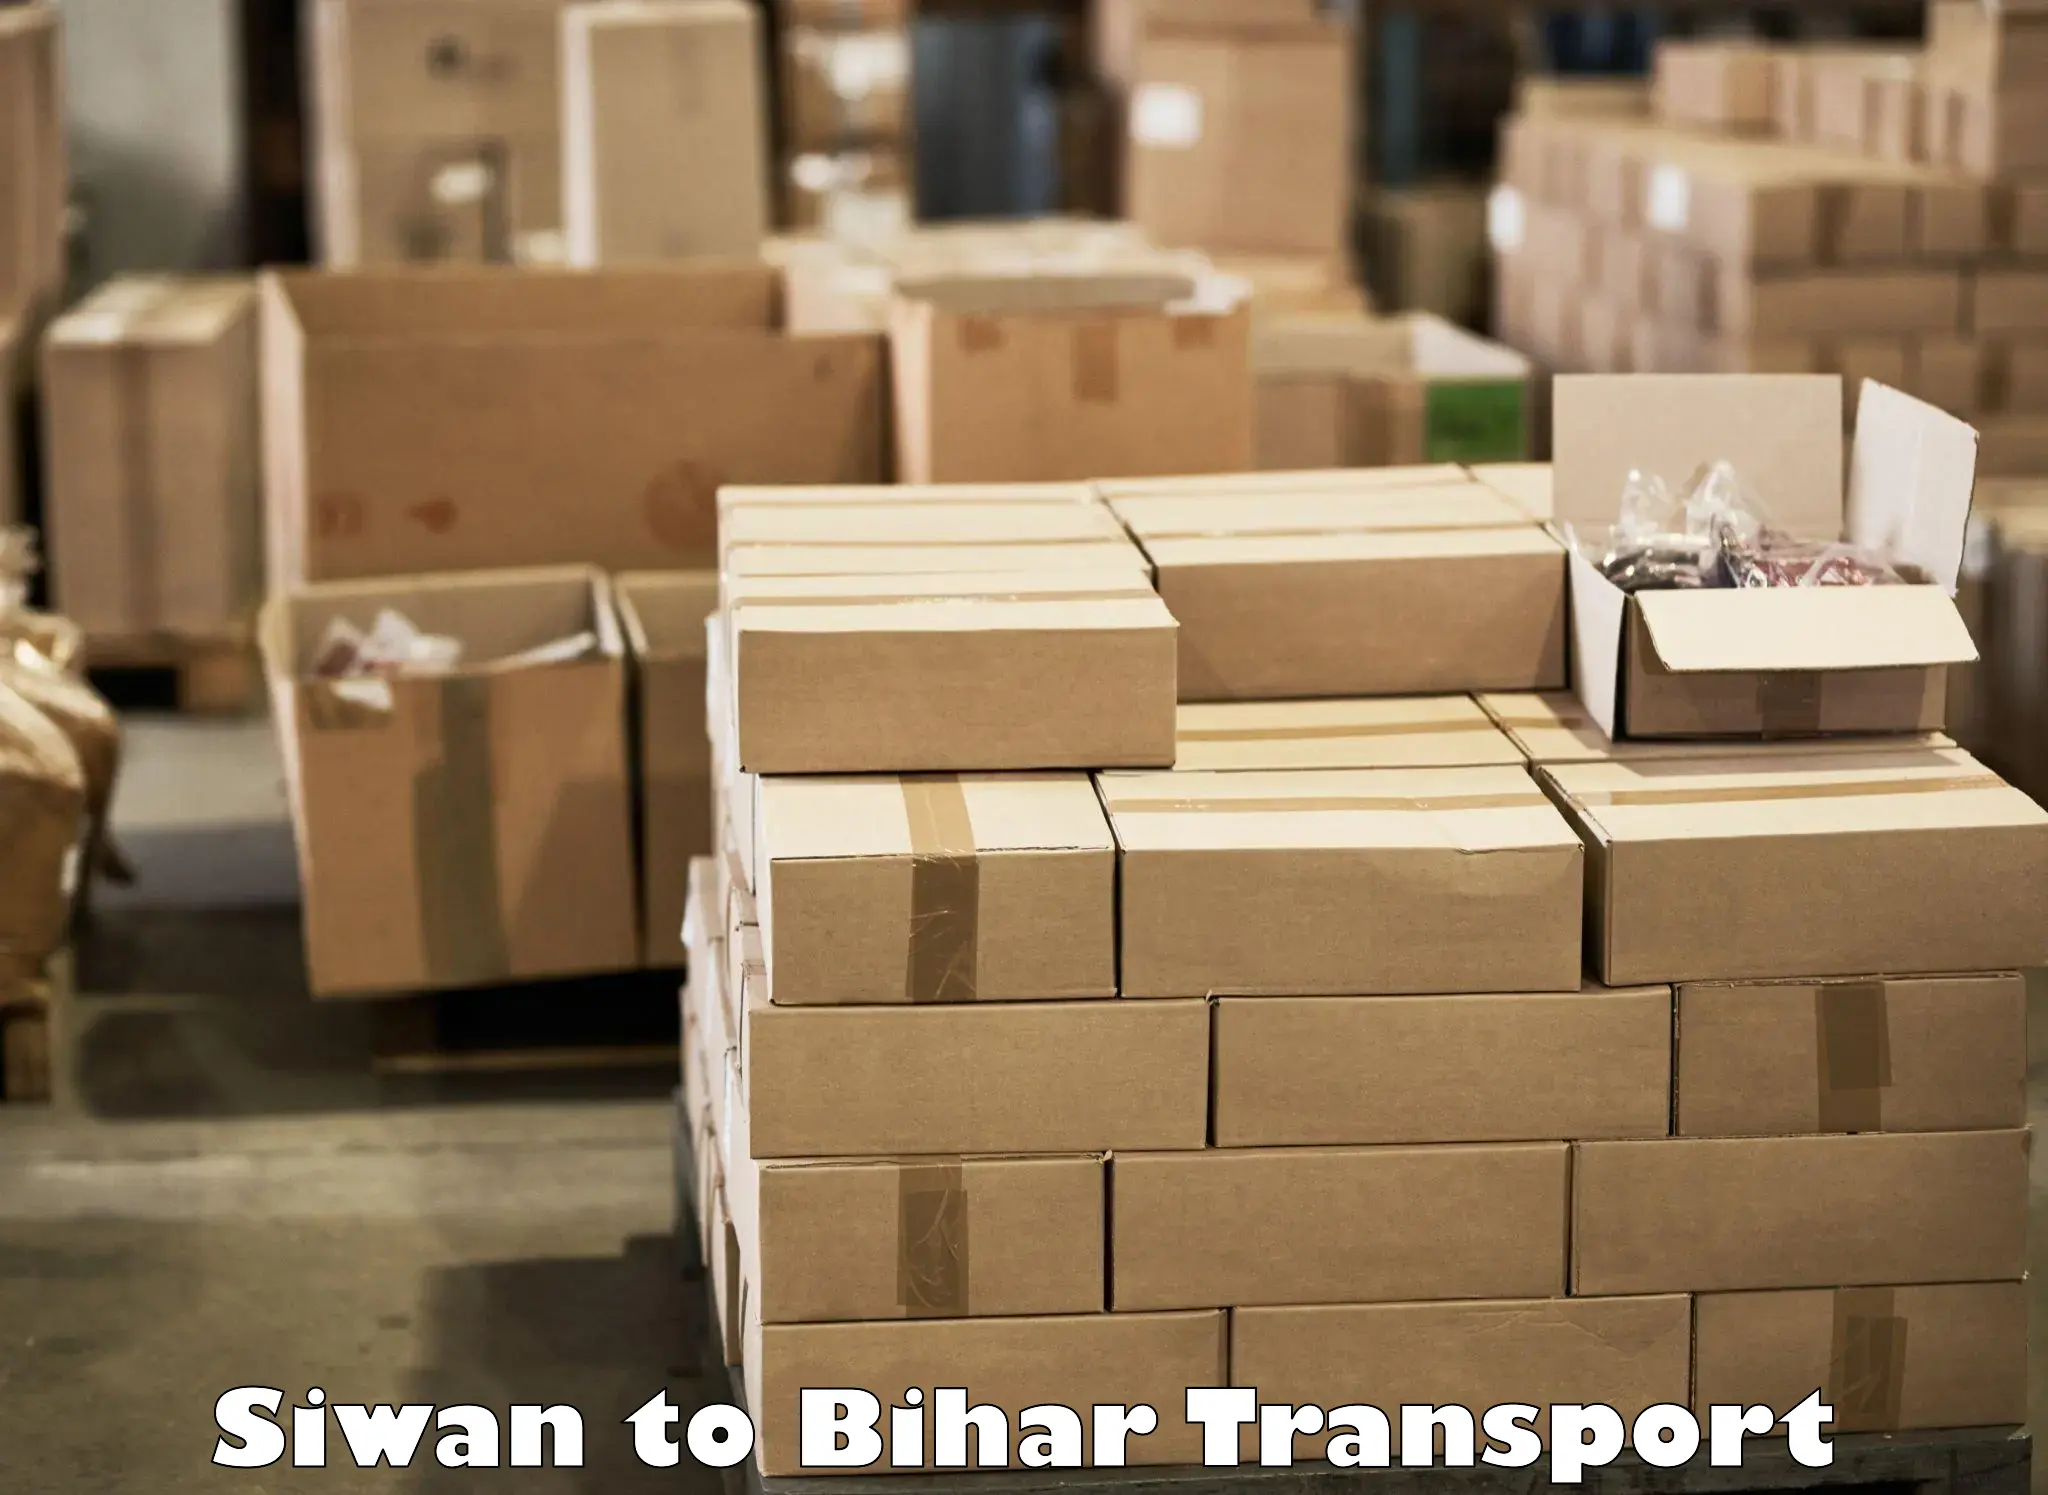 Delivery service Siwan to Dhaka